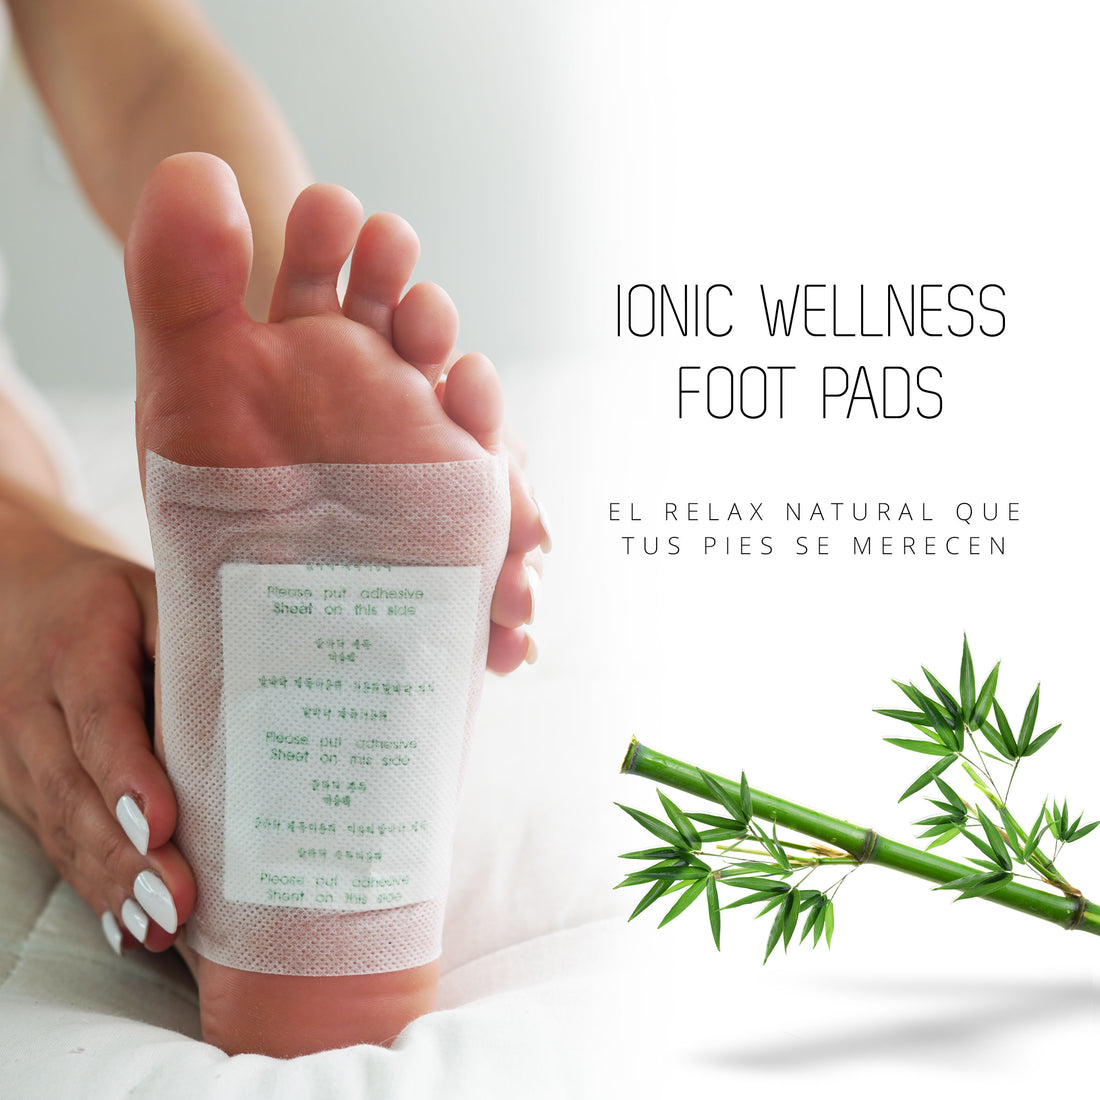 PARCHES PARA PIES D-TOX WELLNESS FOOT PADS